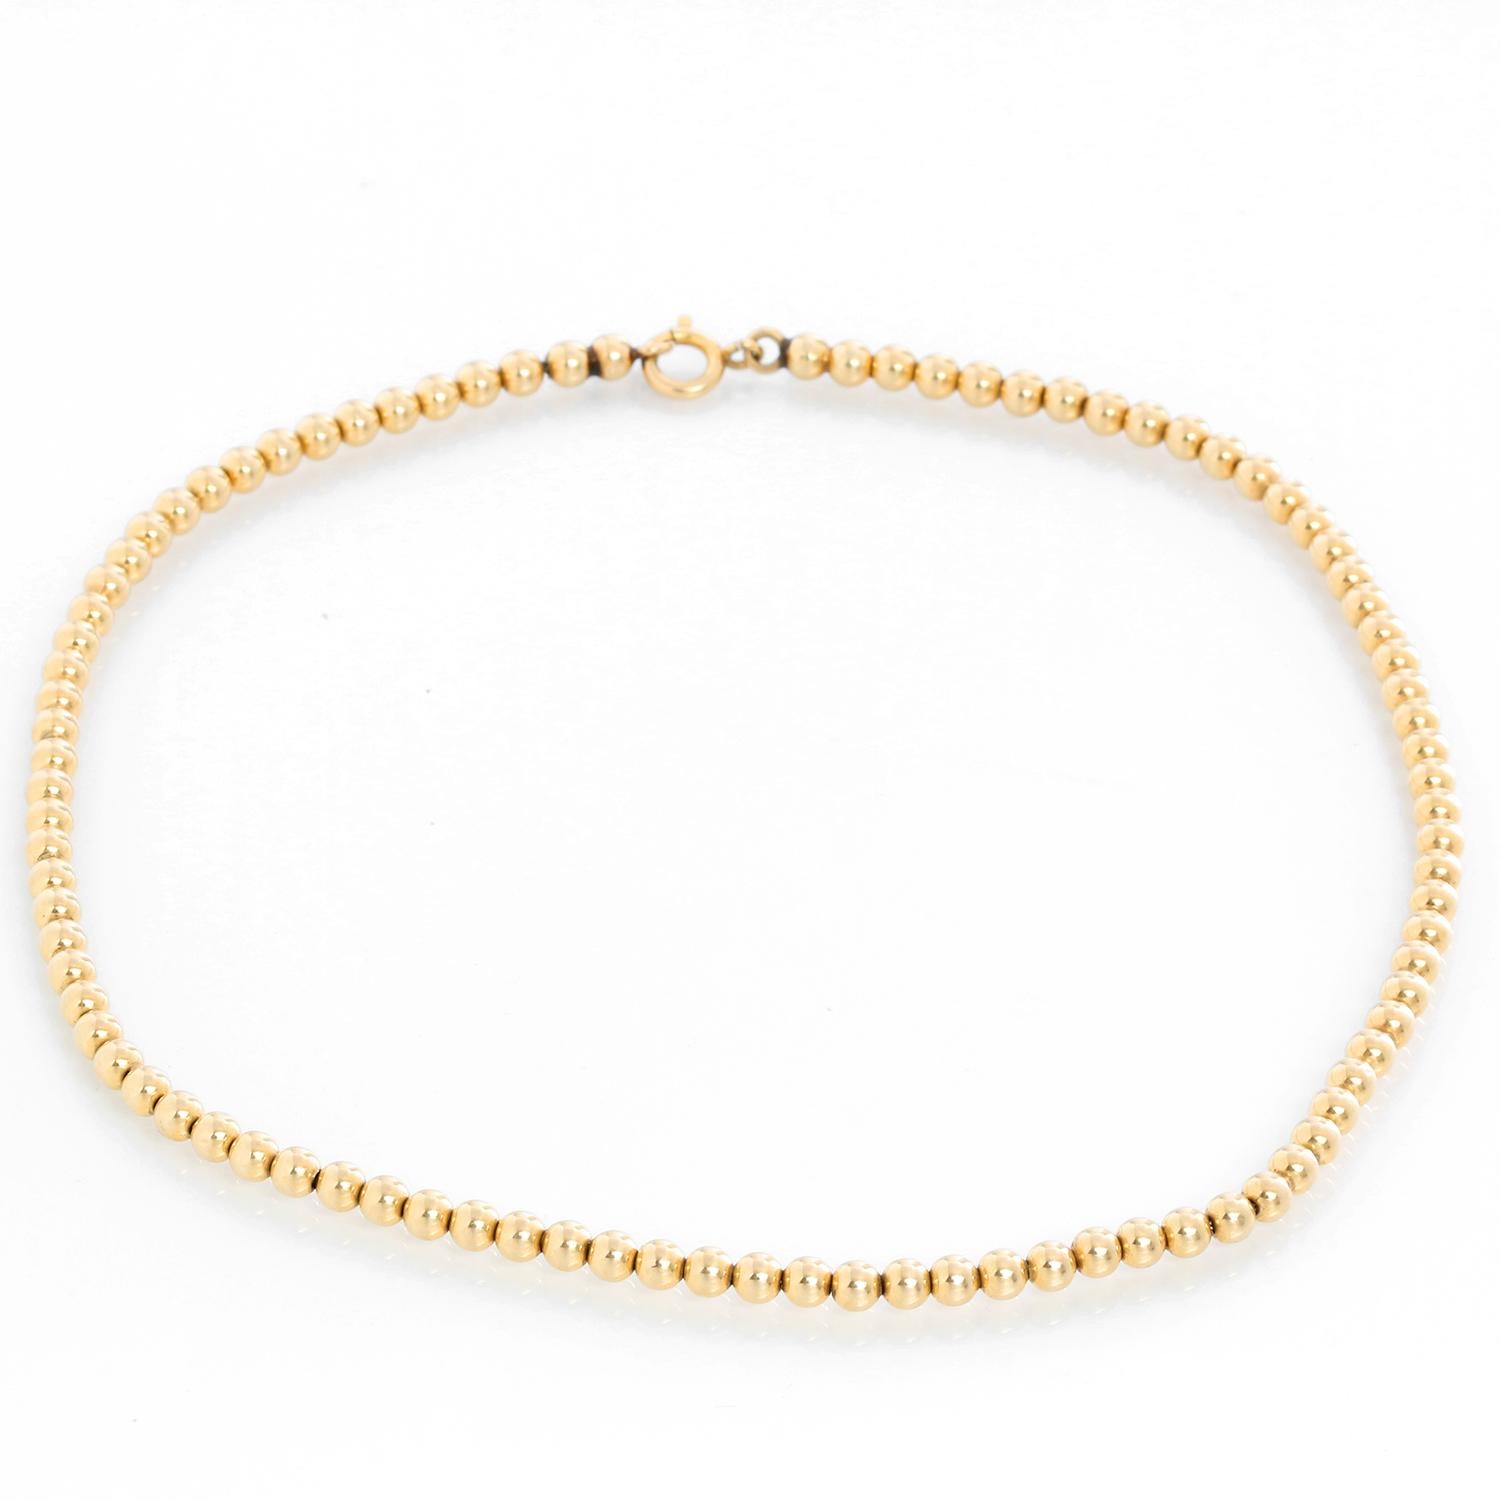 14K Gold Bead Necklace - 14K Yellow gold bead necklace. Measures 16 inches. Total weight 9.7 grams. 